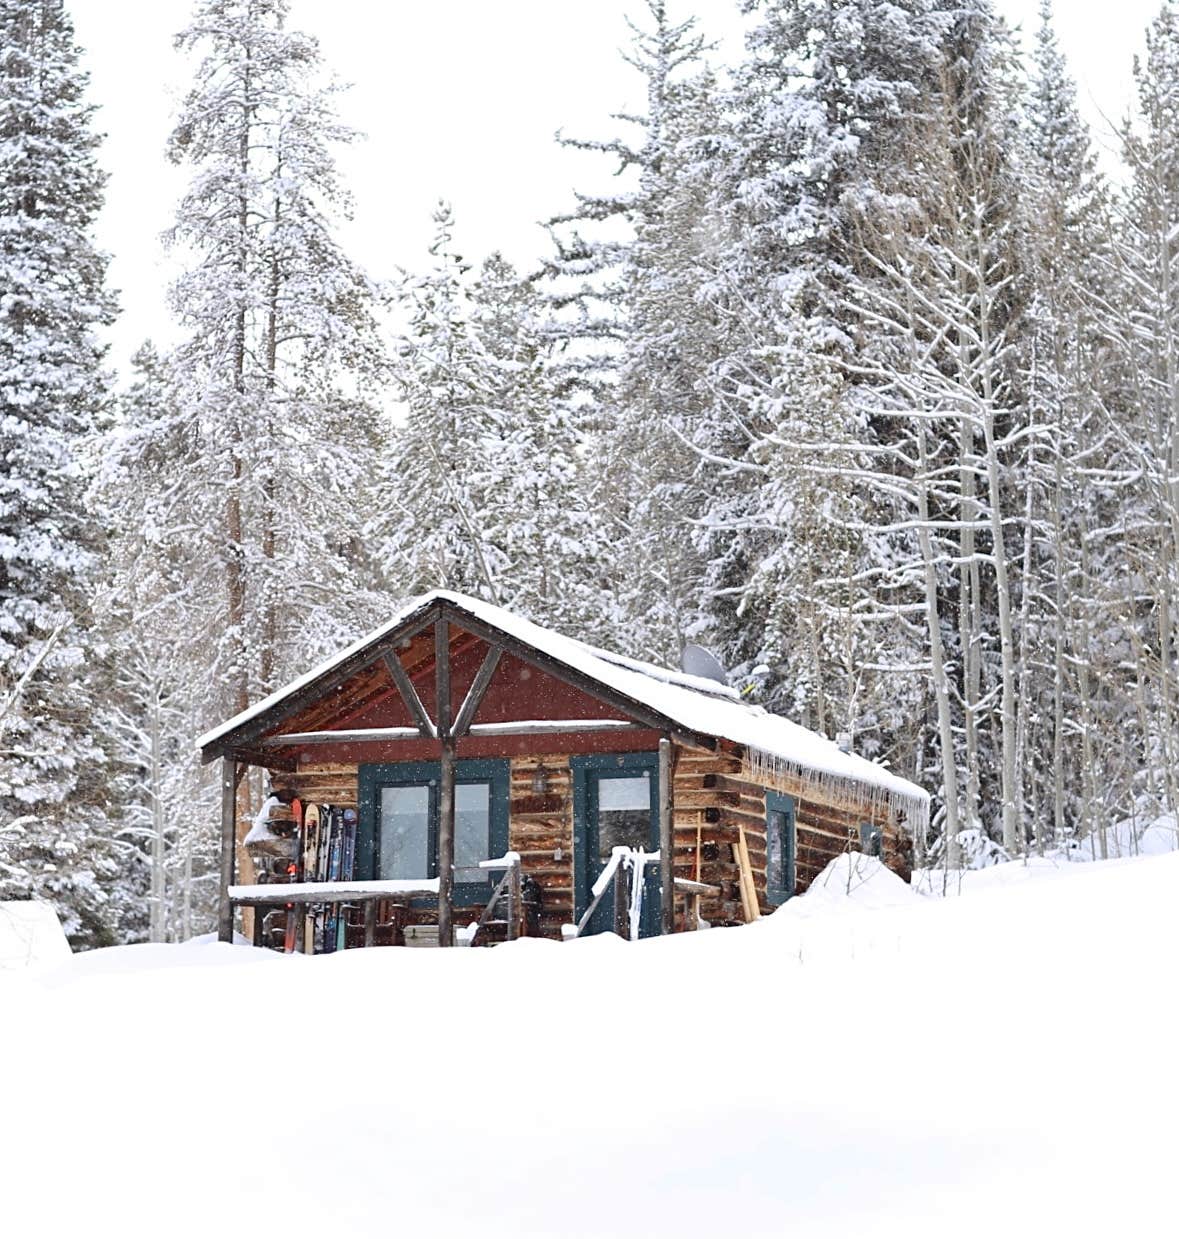 Winter Cold Plunge Cabin Retreat is Warmly Received by All